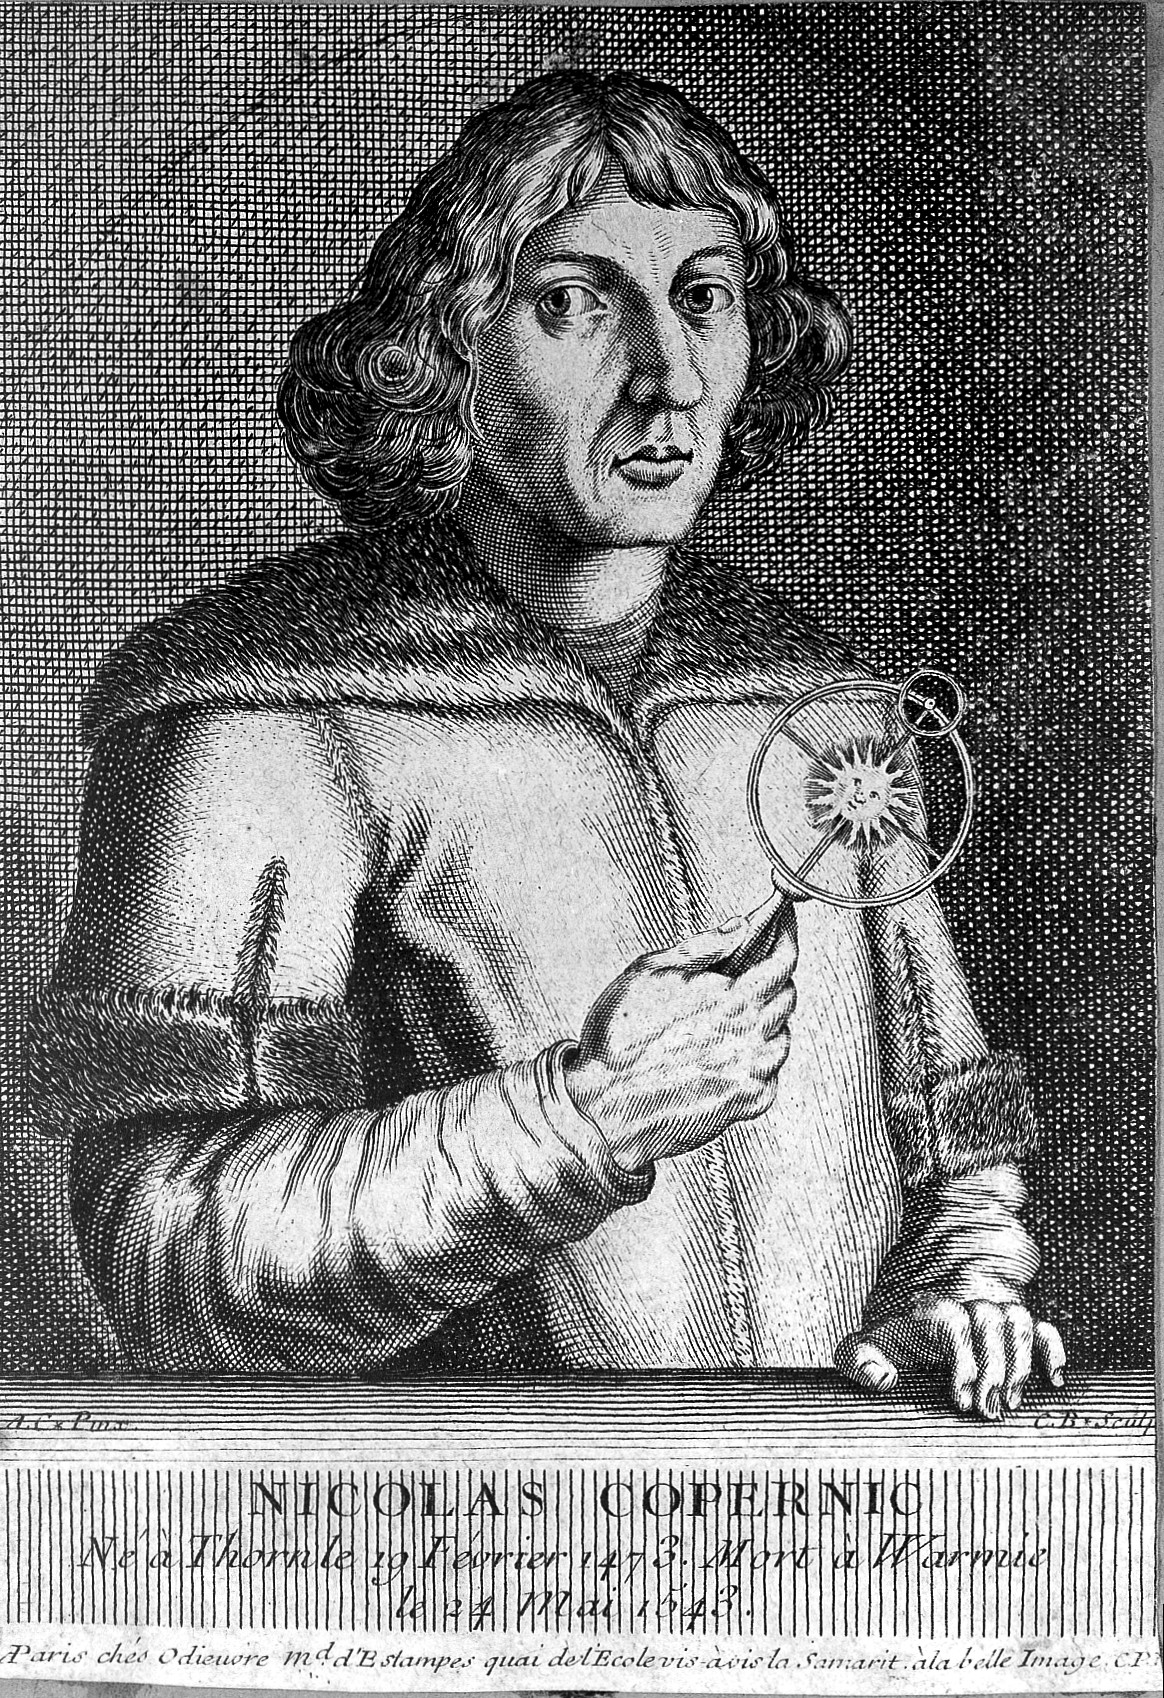 Drawing of Nicholas Copernicus holding a scientific instrument